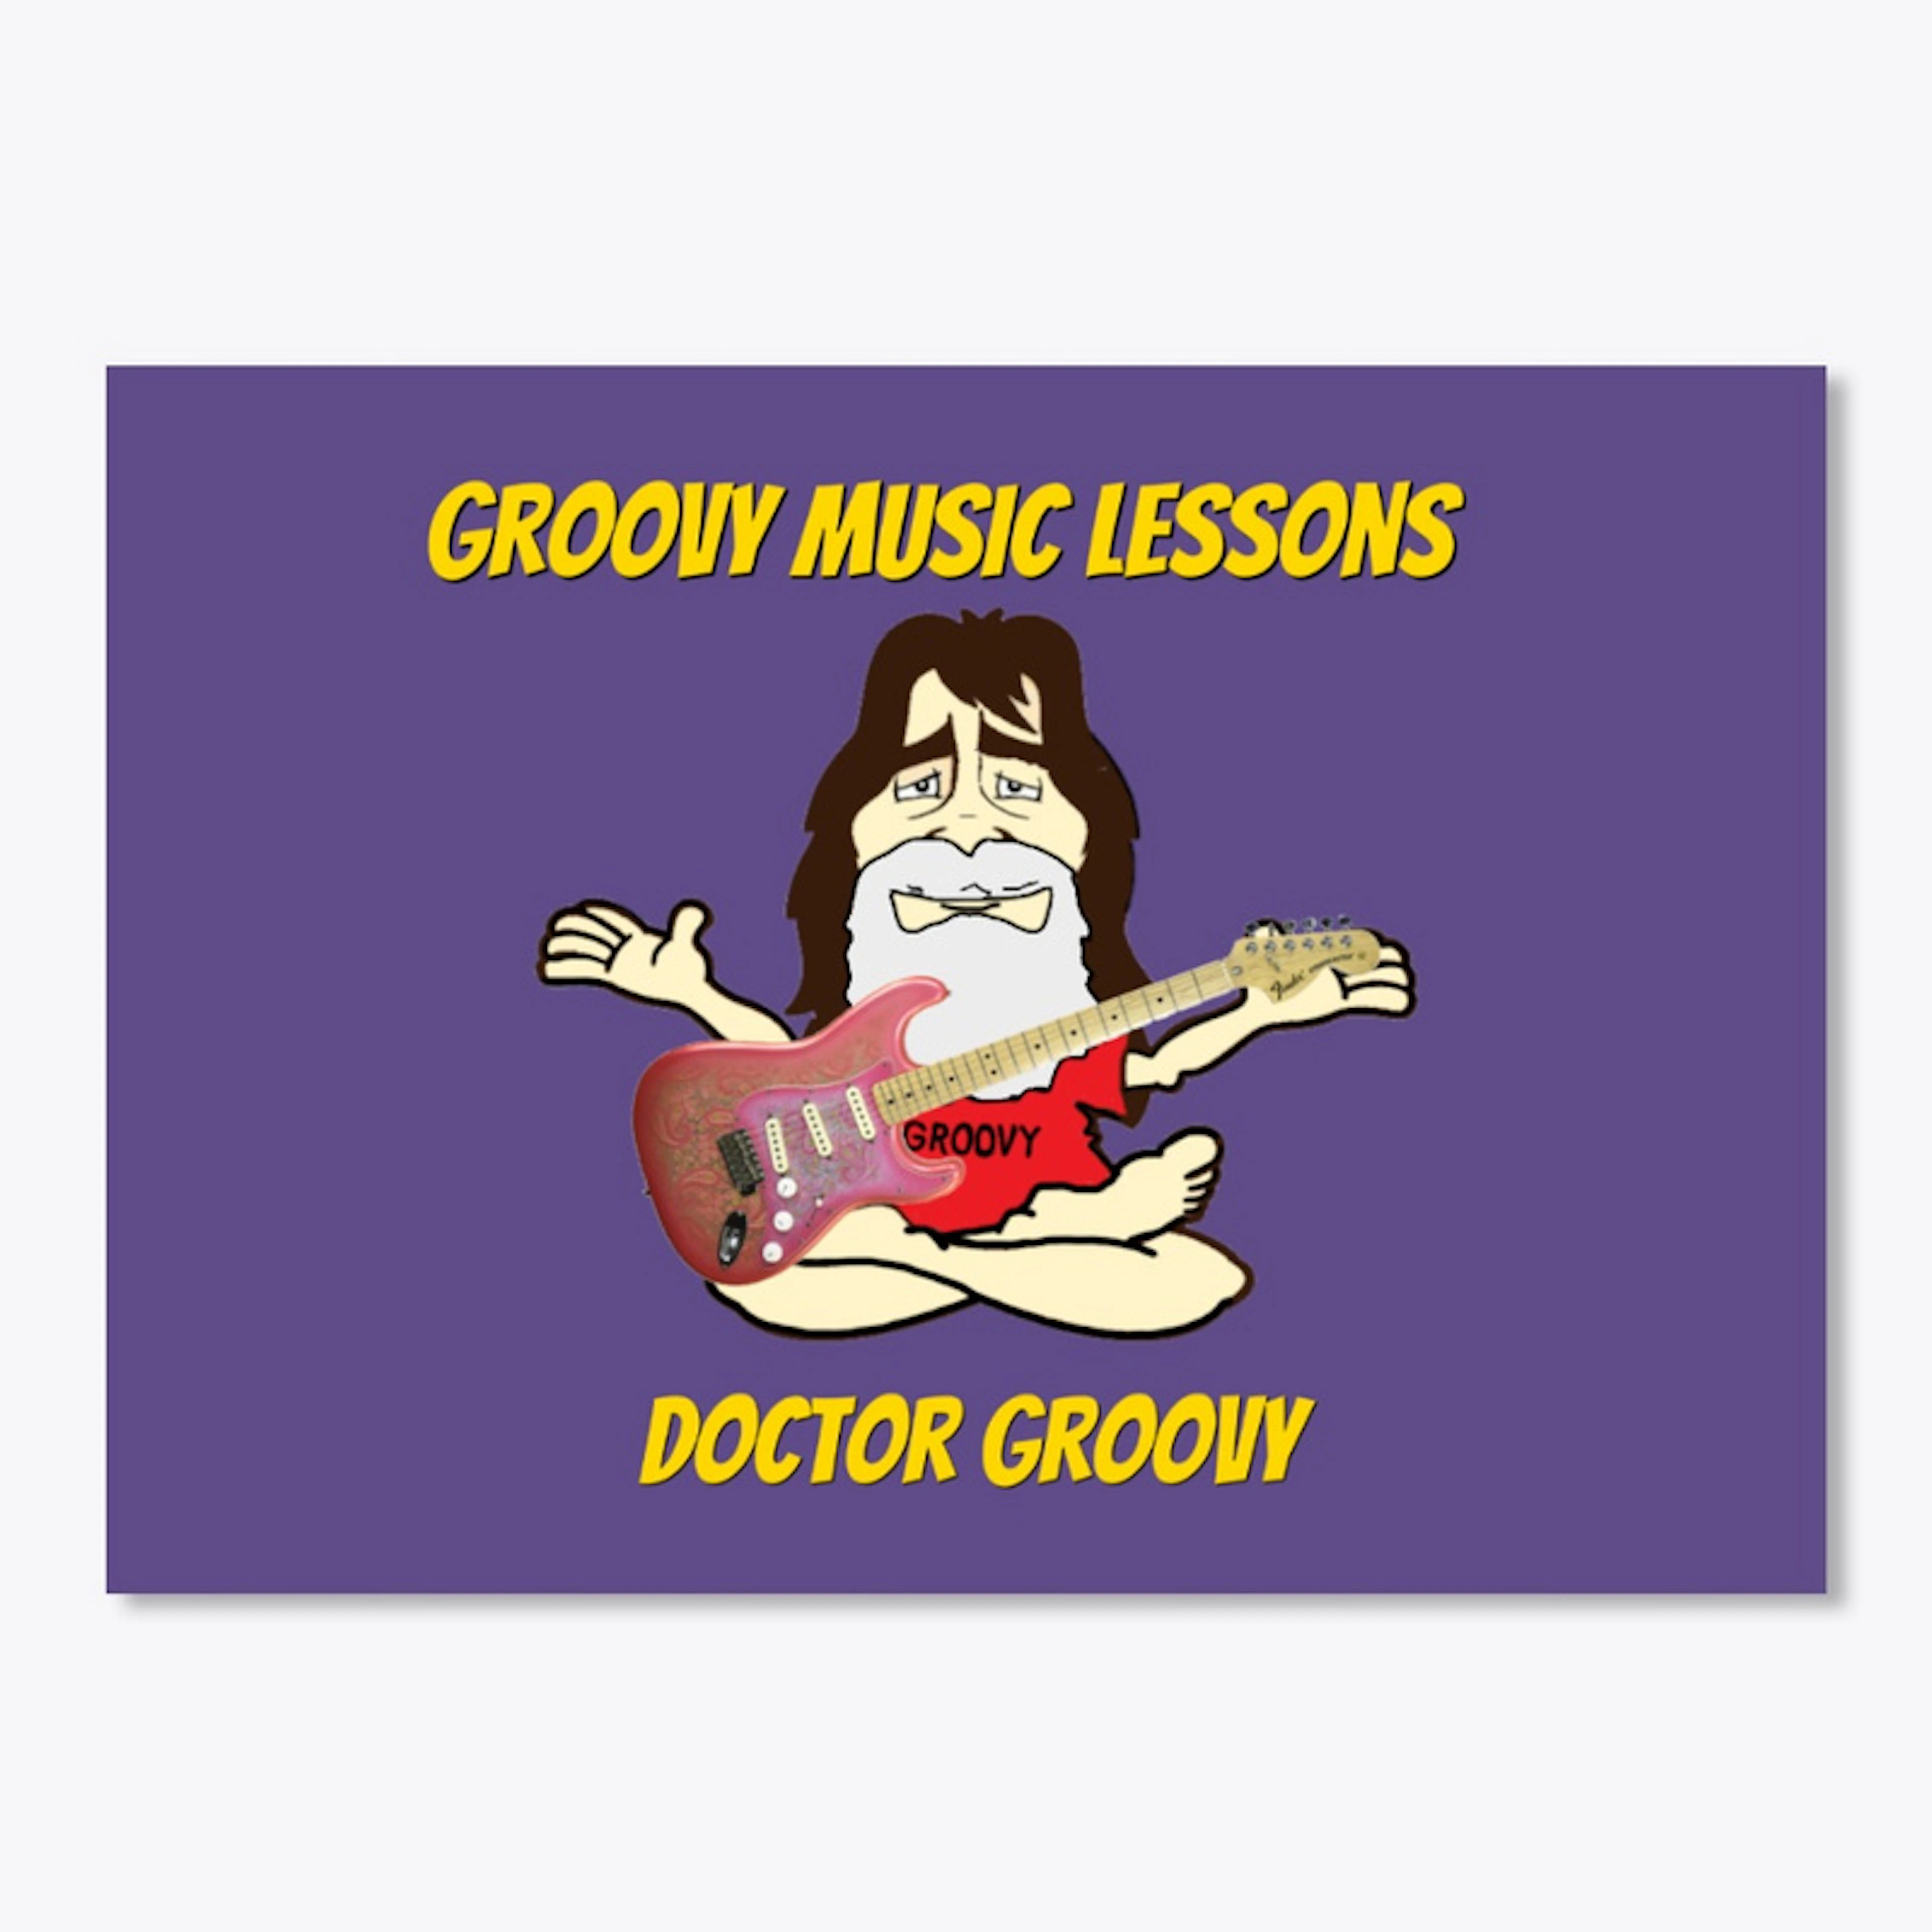 GROOVY MUSIC LESSONS PAISLEY STRAT